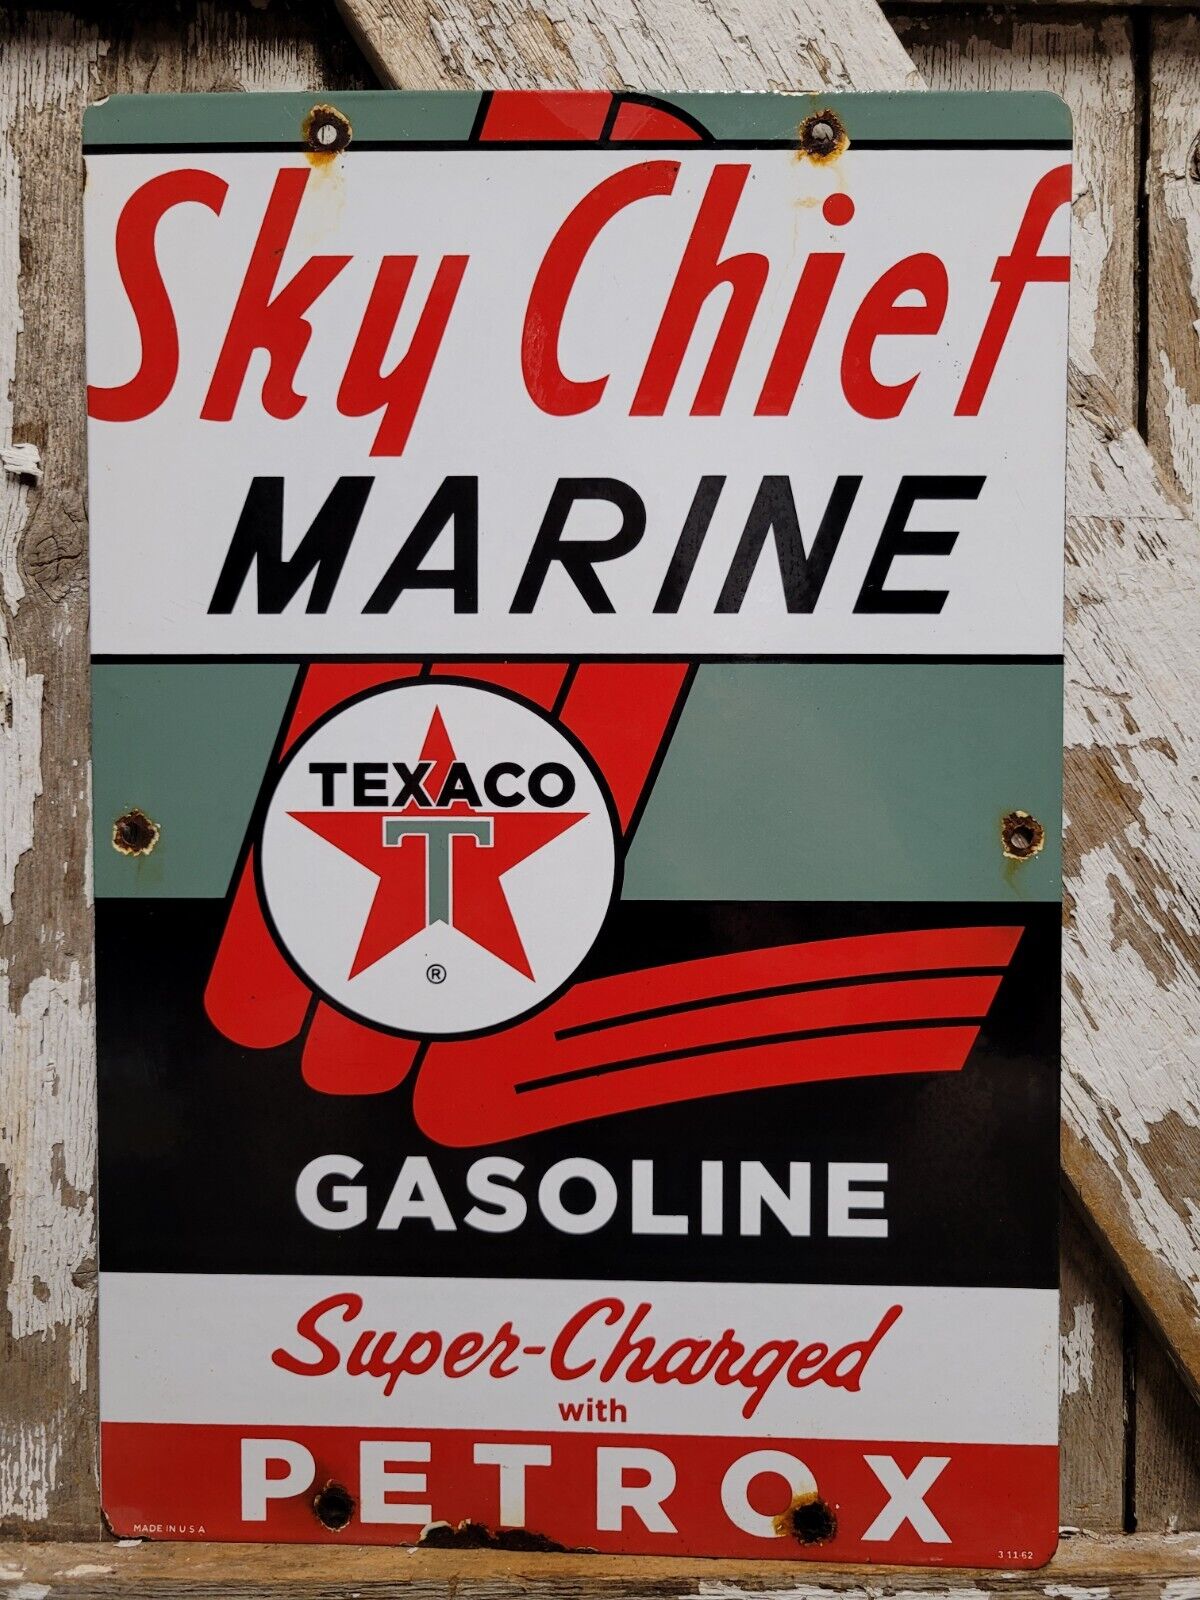 VINTAGE 62 TEXACO PORCELAIN SIGN SKY CHIEF PETROX MOTOR OIL GAS STATION SERVICE